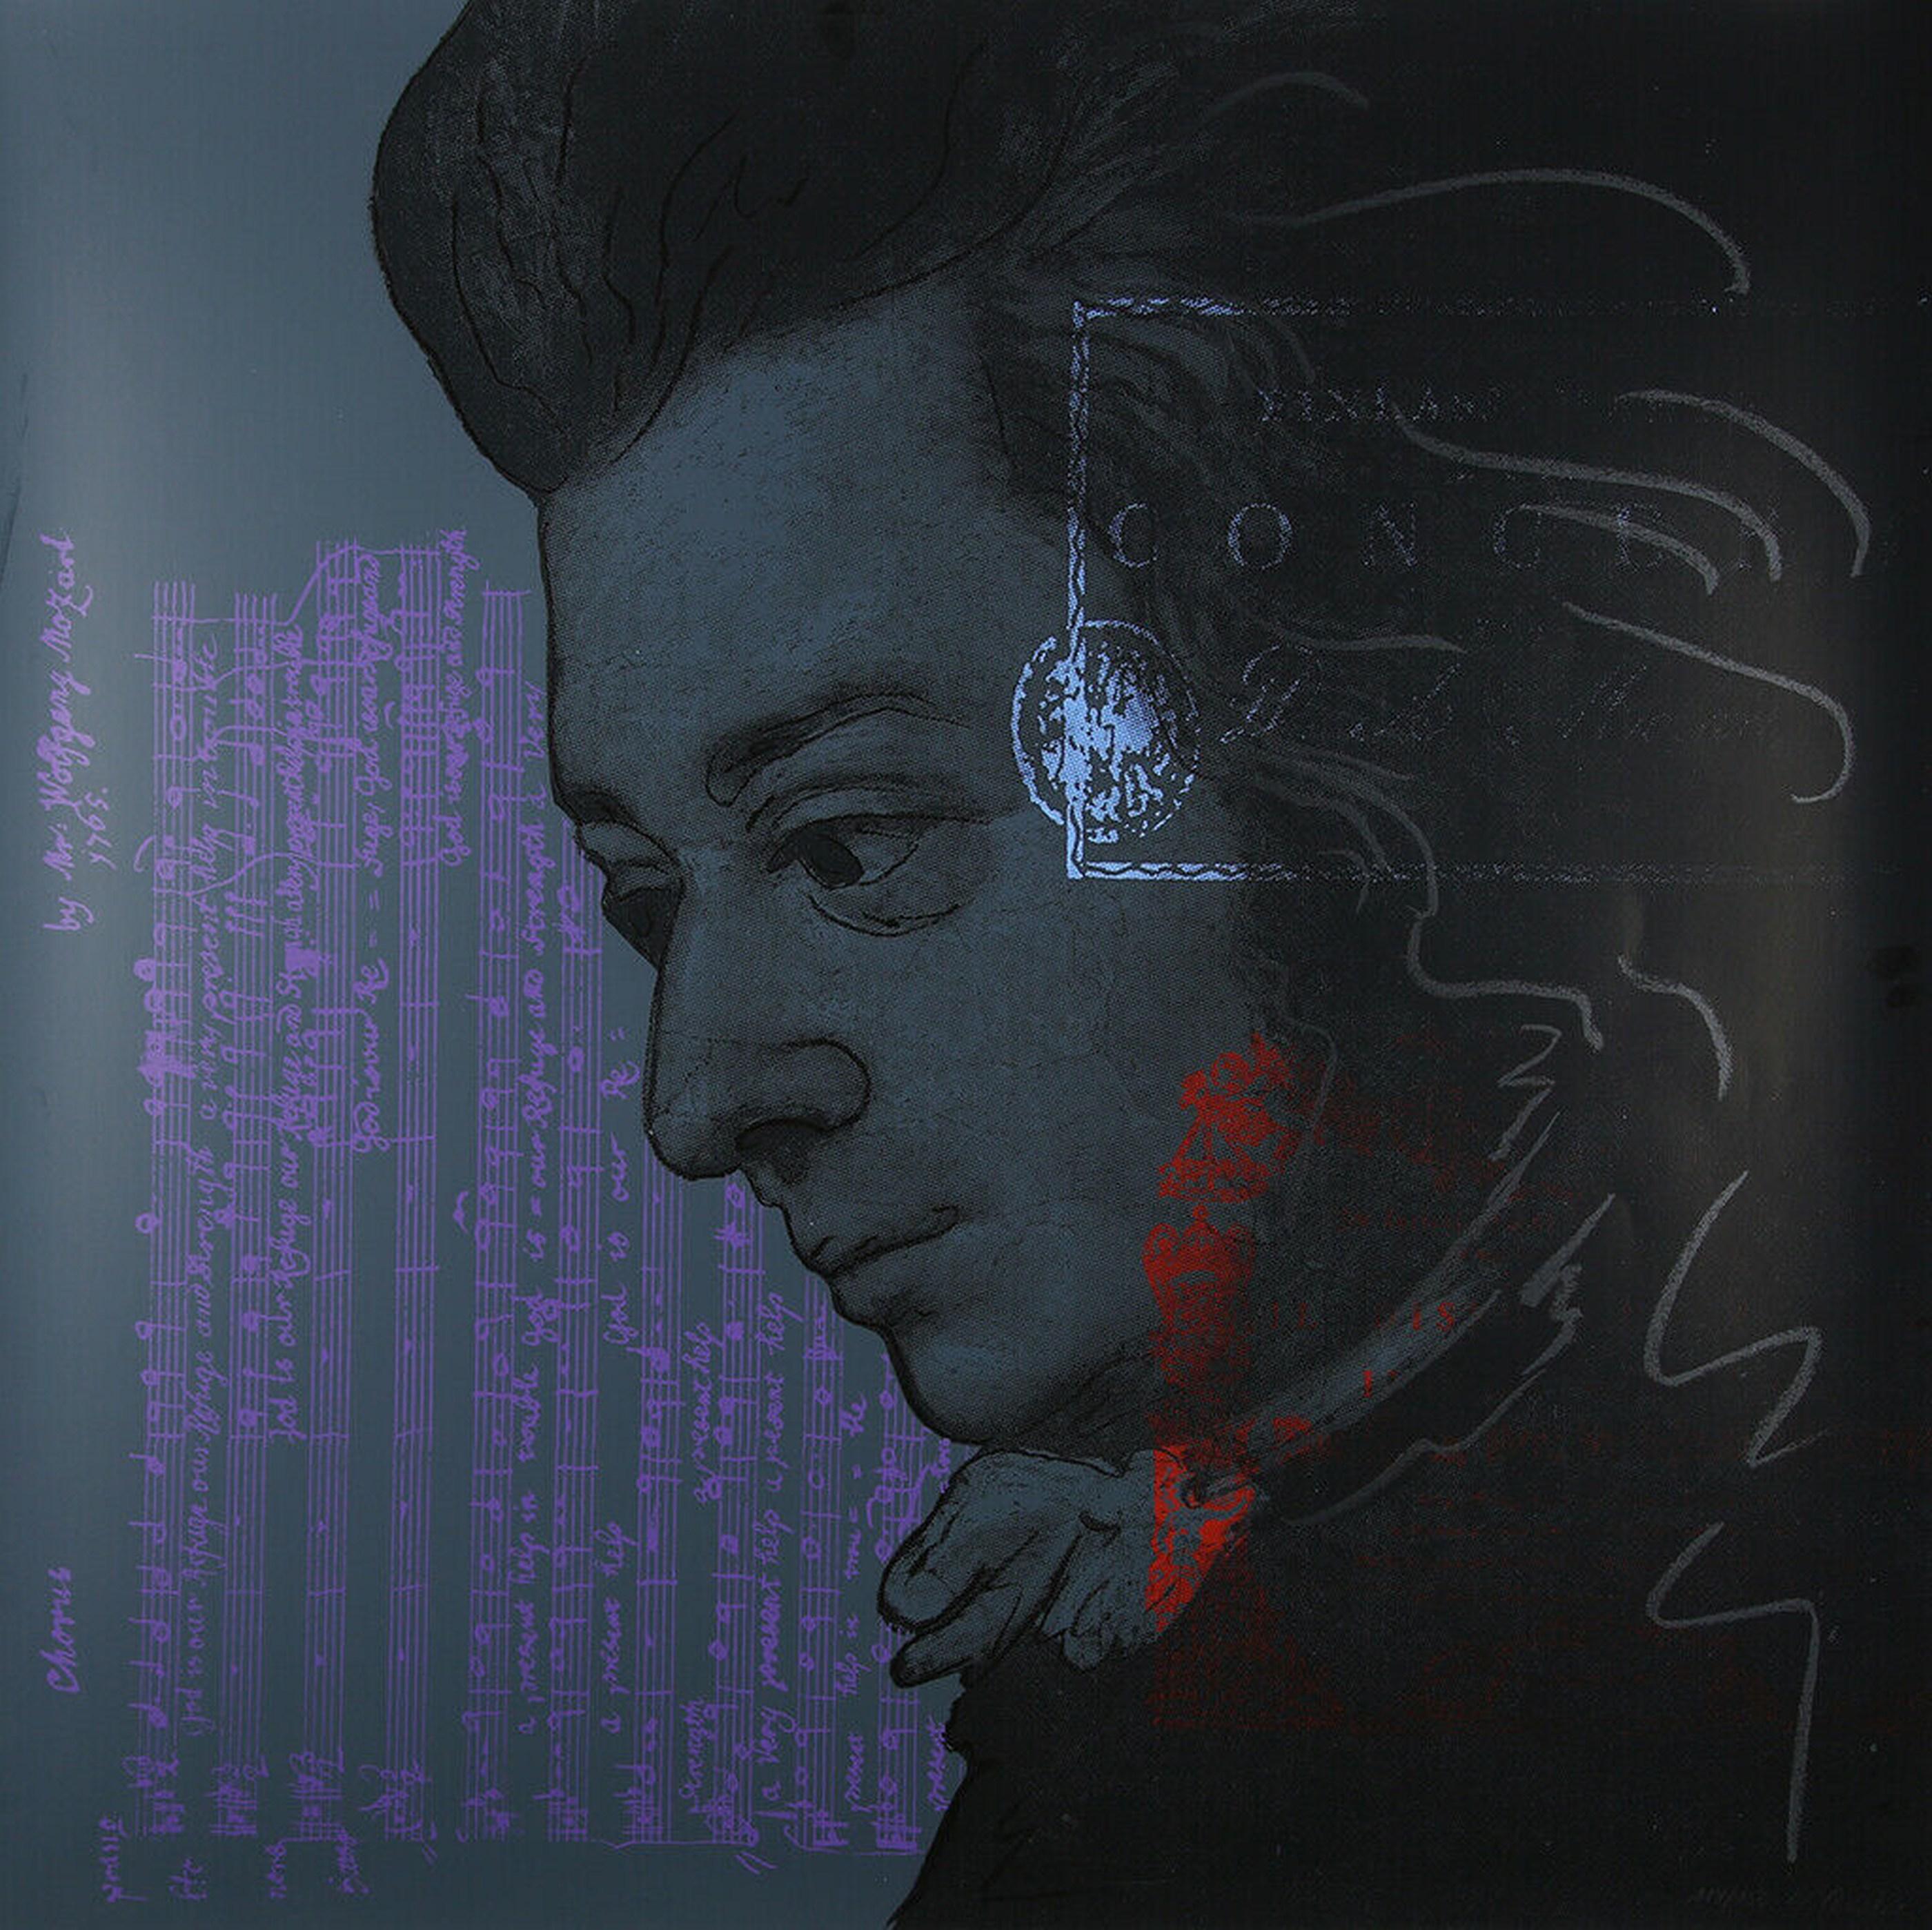 Wolfgang Amadeus Mozart (Pop Art, Warhol) ~60% OFF LIST PRICE LIMITED TIME ONLY - Print by Jurgen Kuhl 